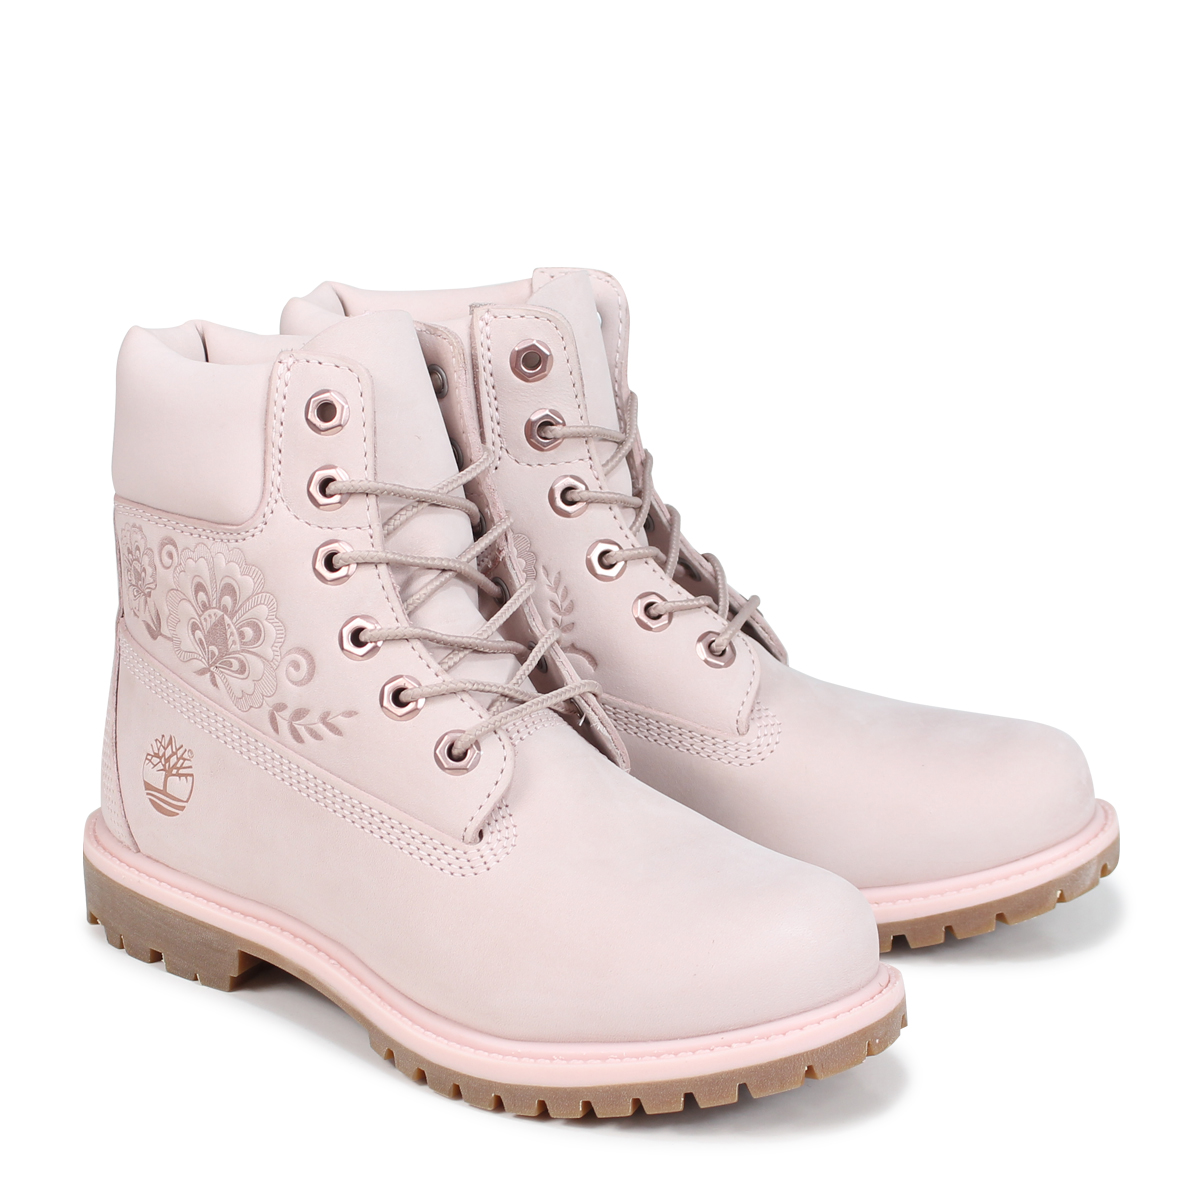 timberland shoes pink